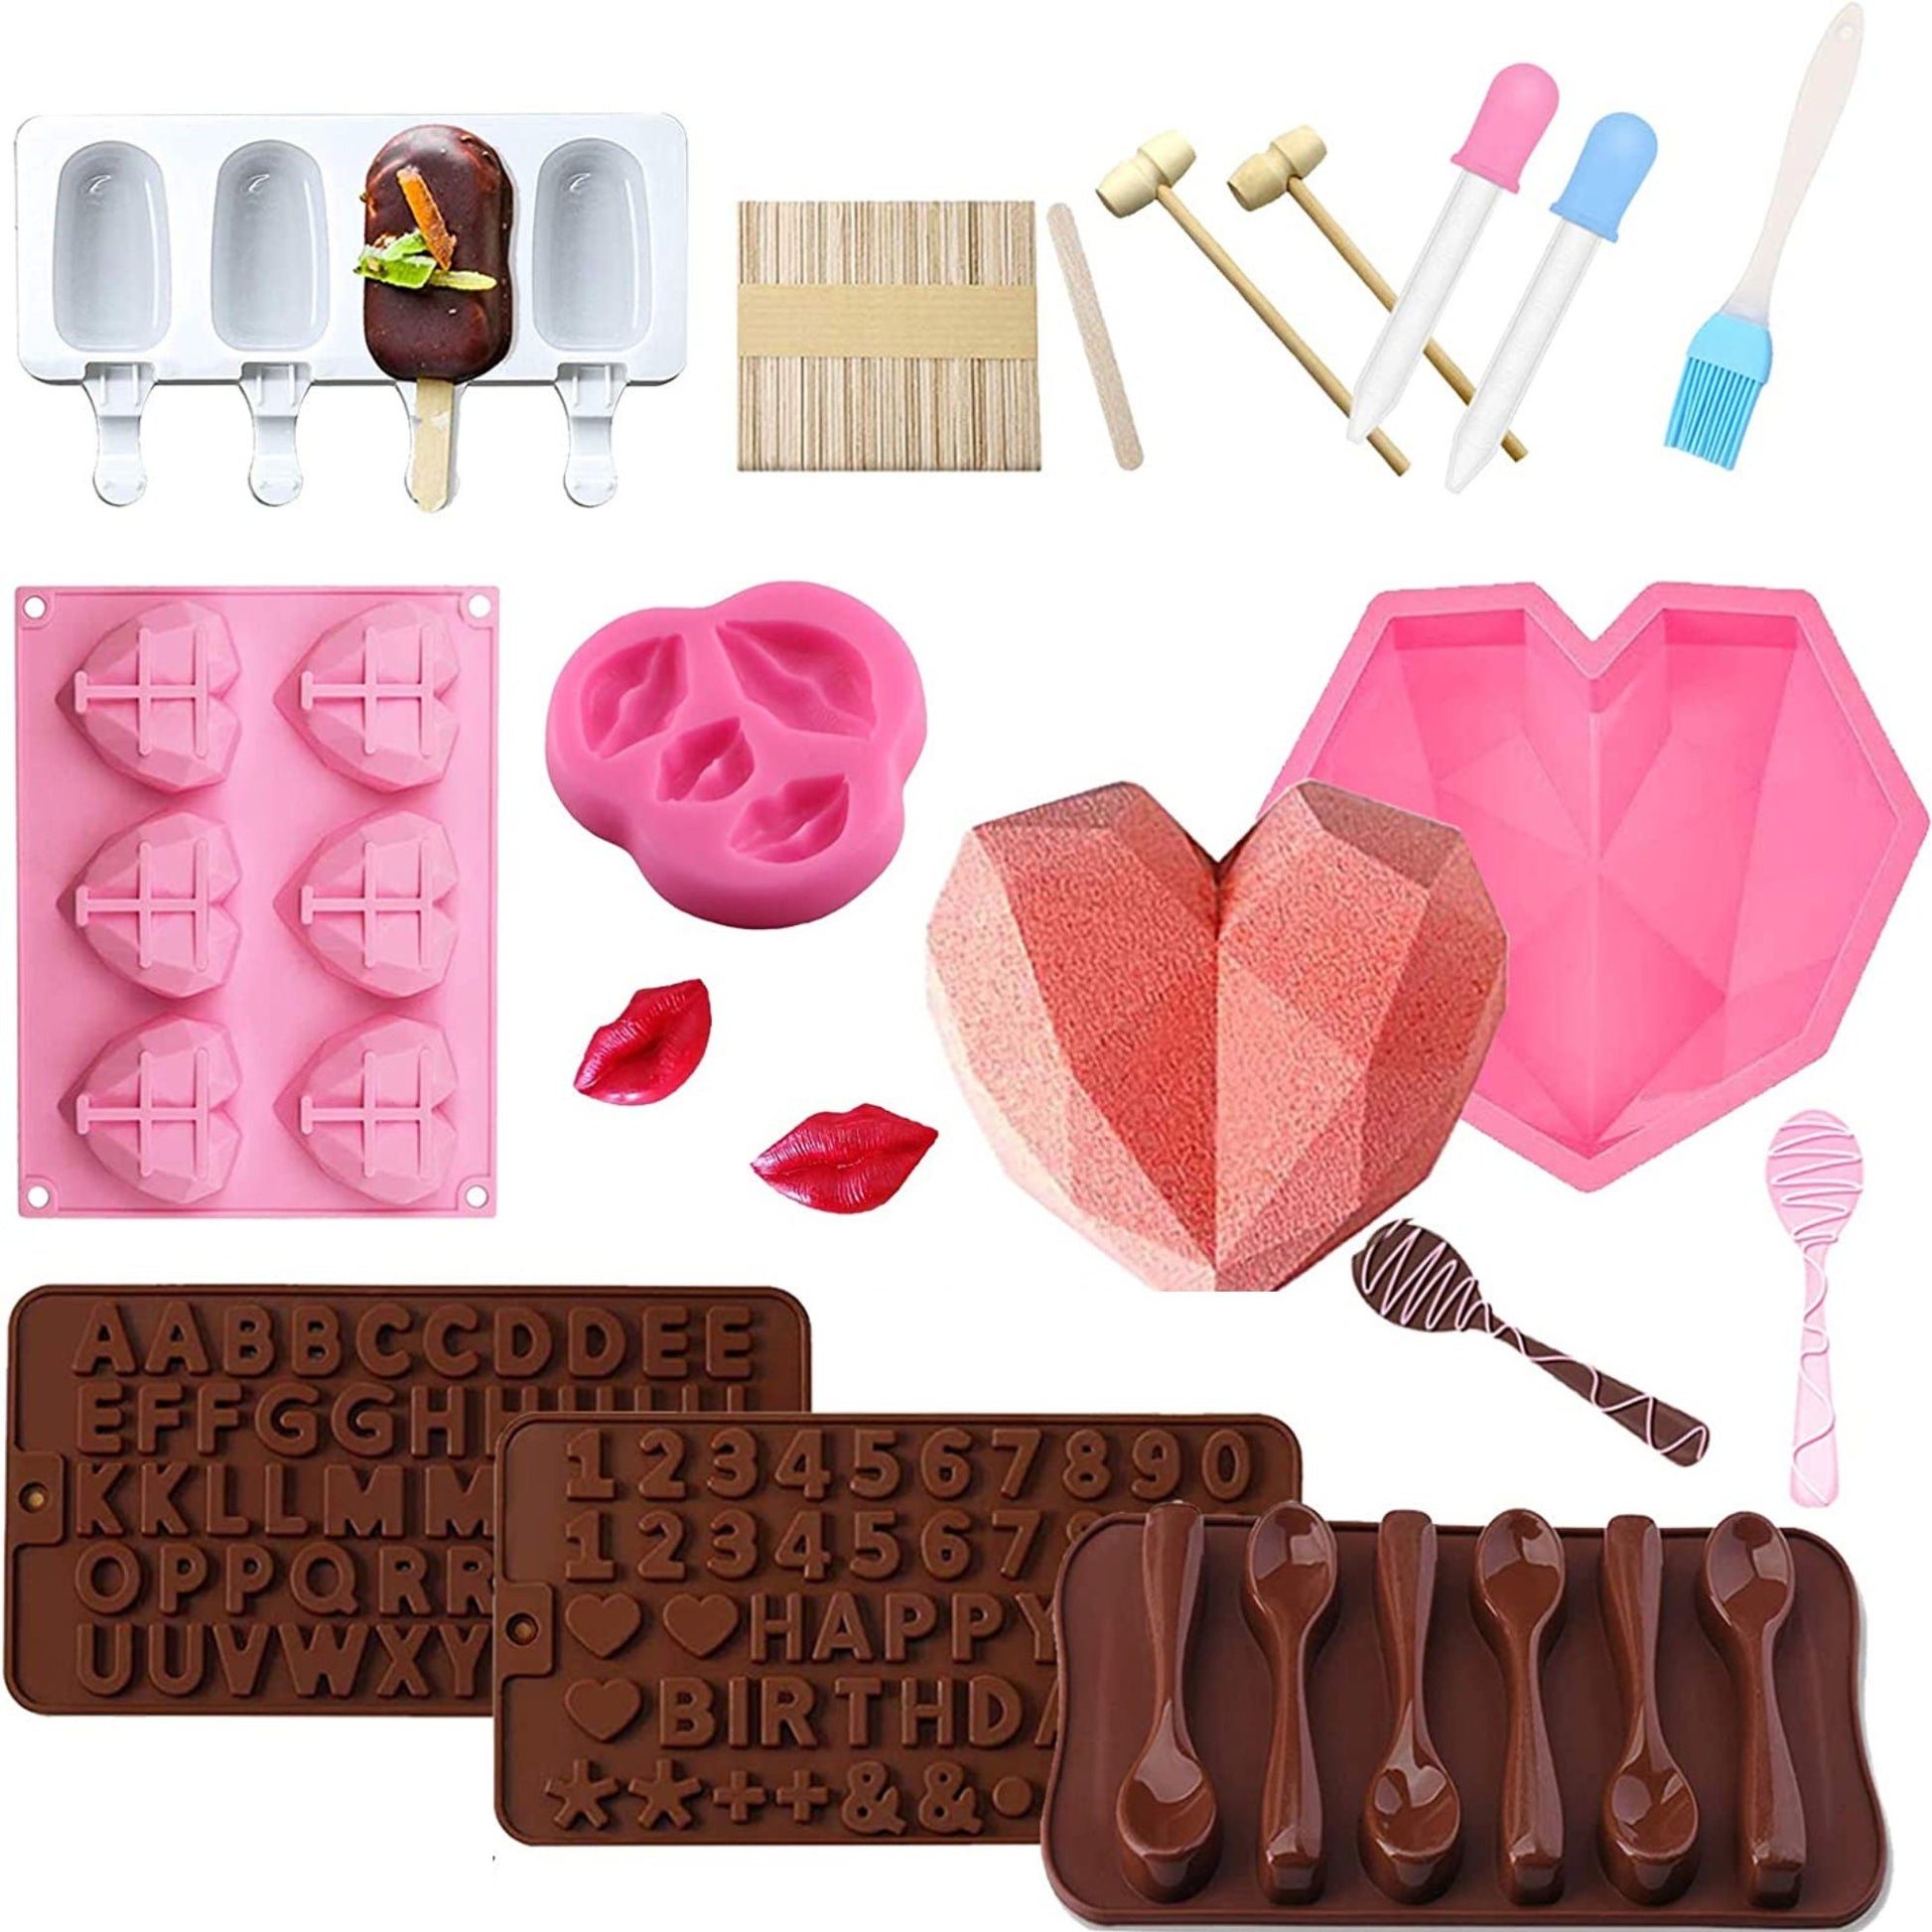 Heart Silicone Chocolate Molds Mousse Cake Baking Reusable Mold